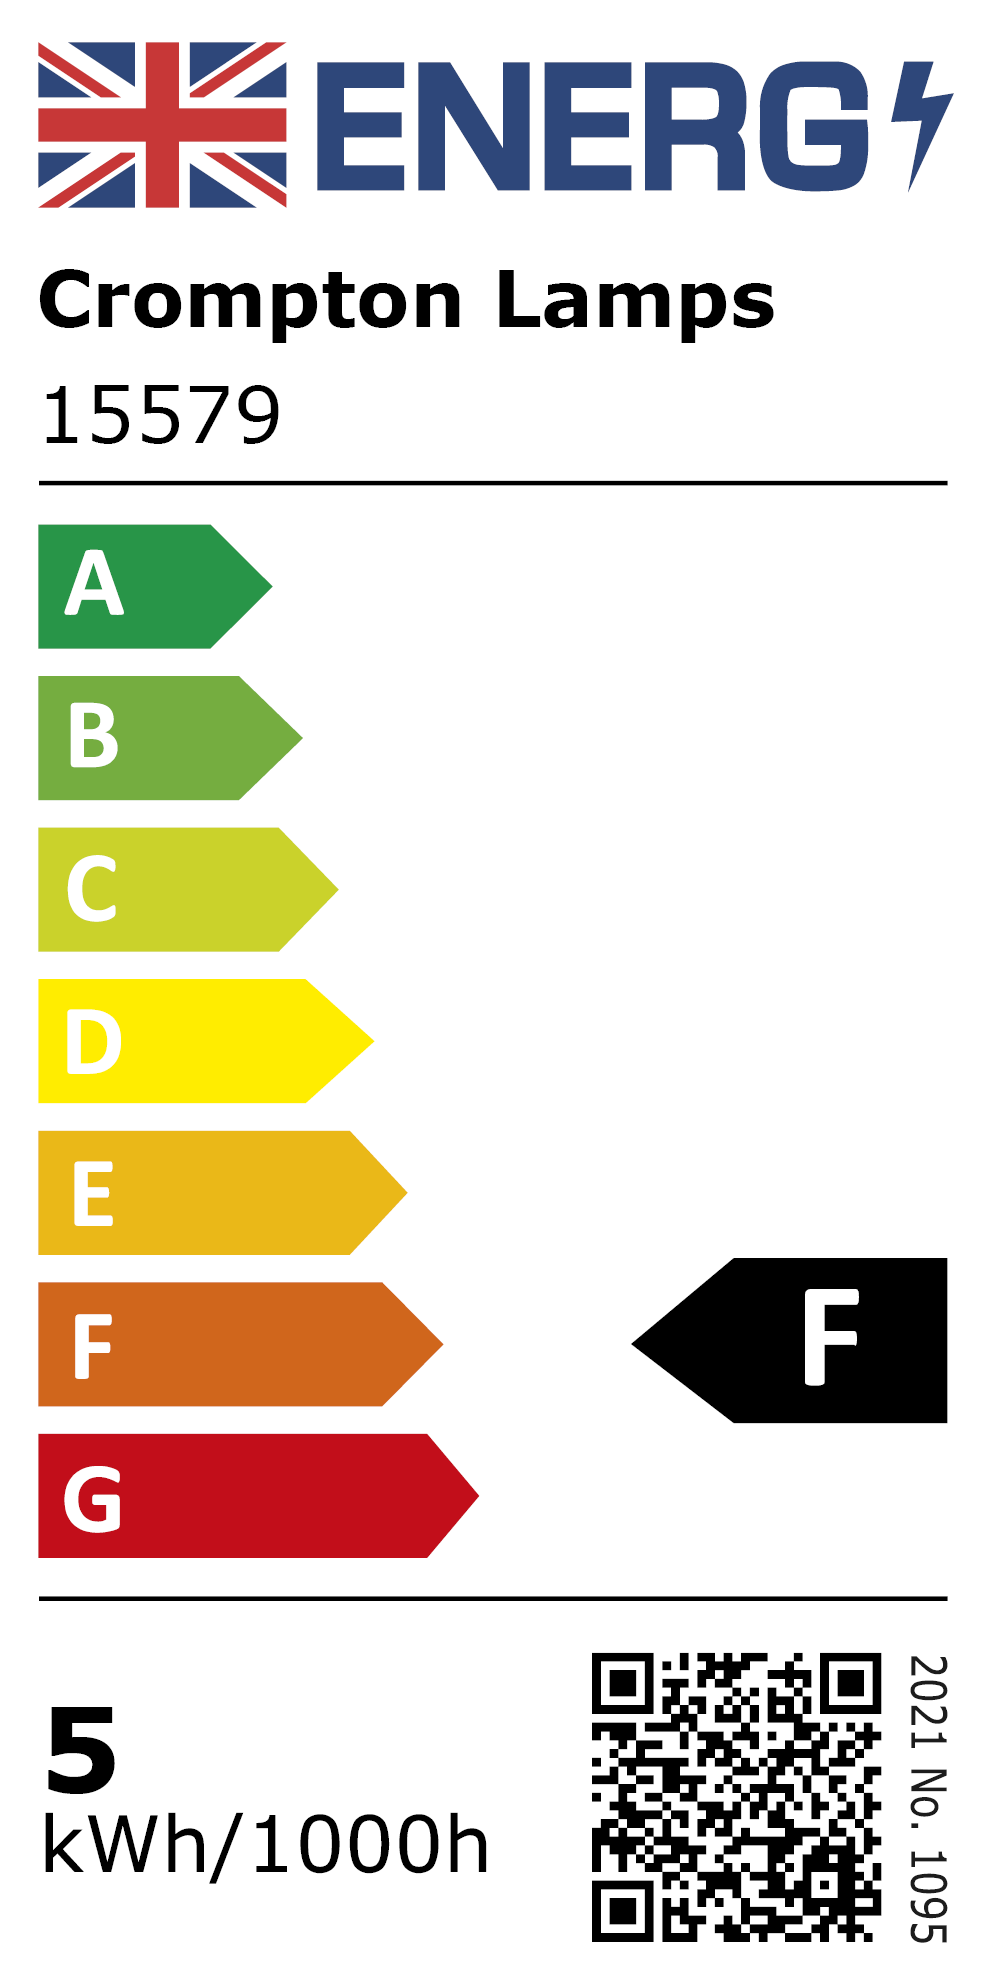 New 2021 Energy Rating Label: MPN 15579